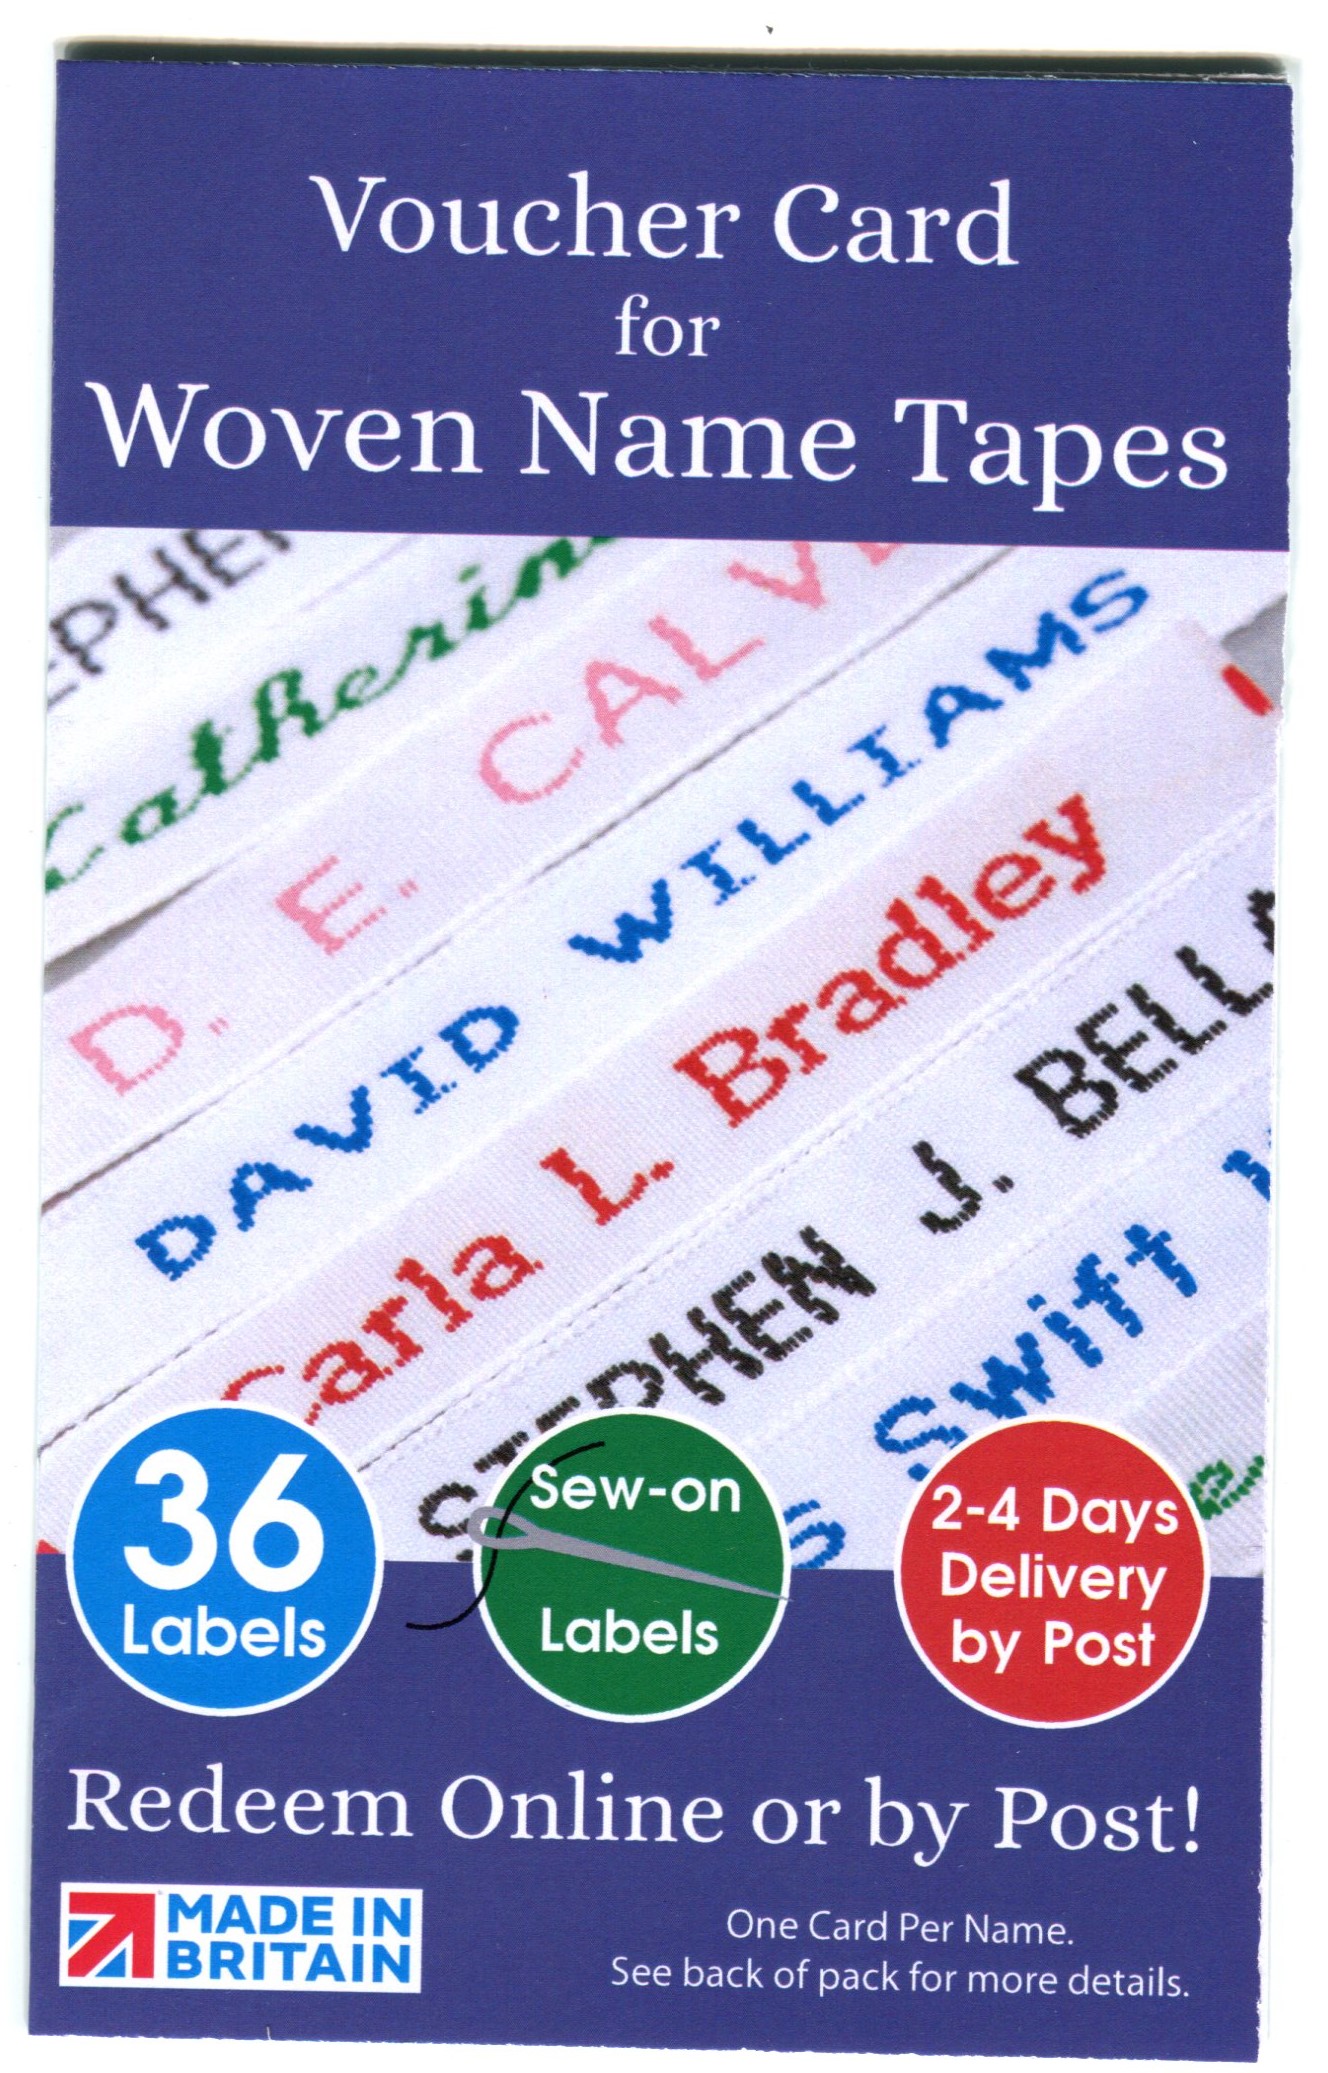 SEW-ON WOVEN NAME TAPE 36 LABELS 1 CARD NTSH/36